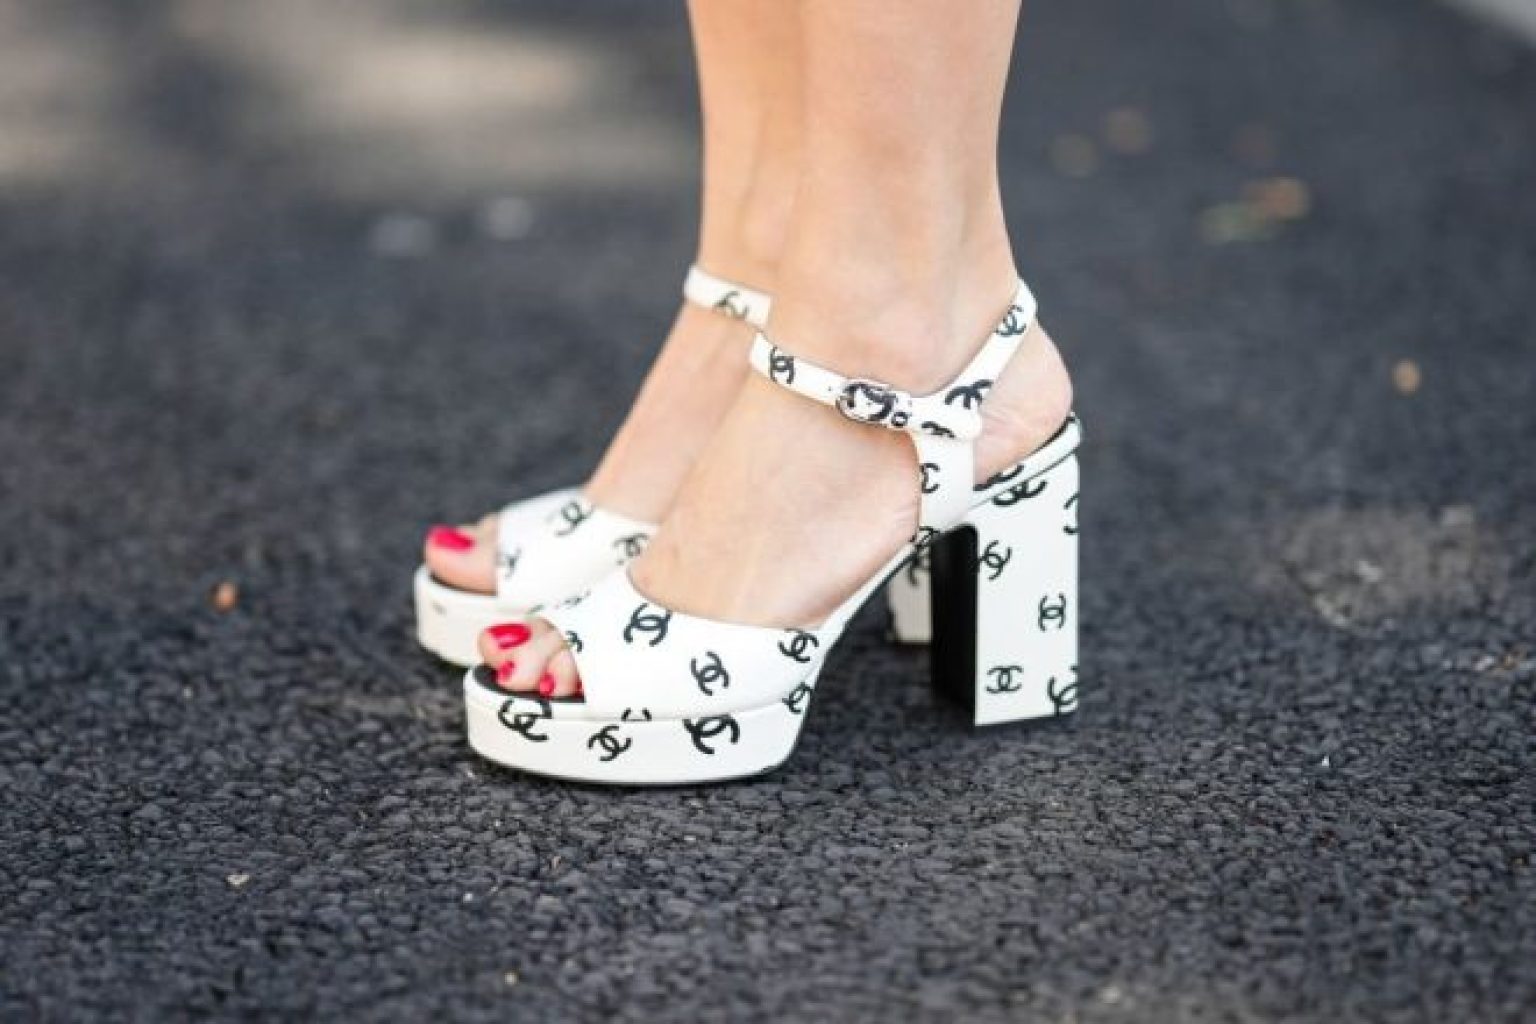 Chanel Shoe Size Chart All About Shoe Size Guide The Shoe Box NYC